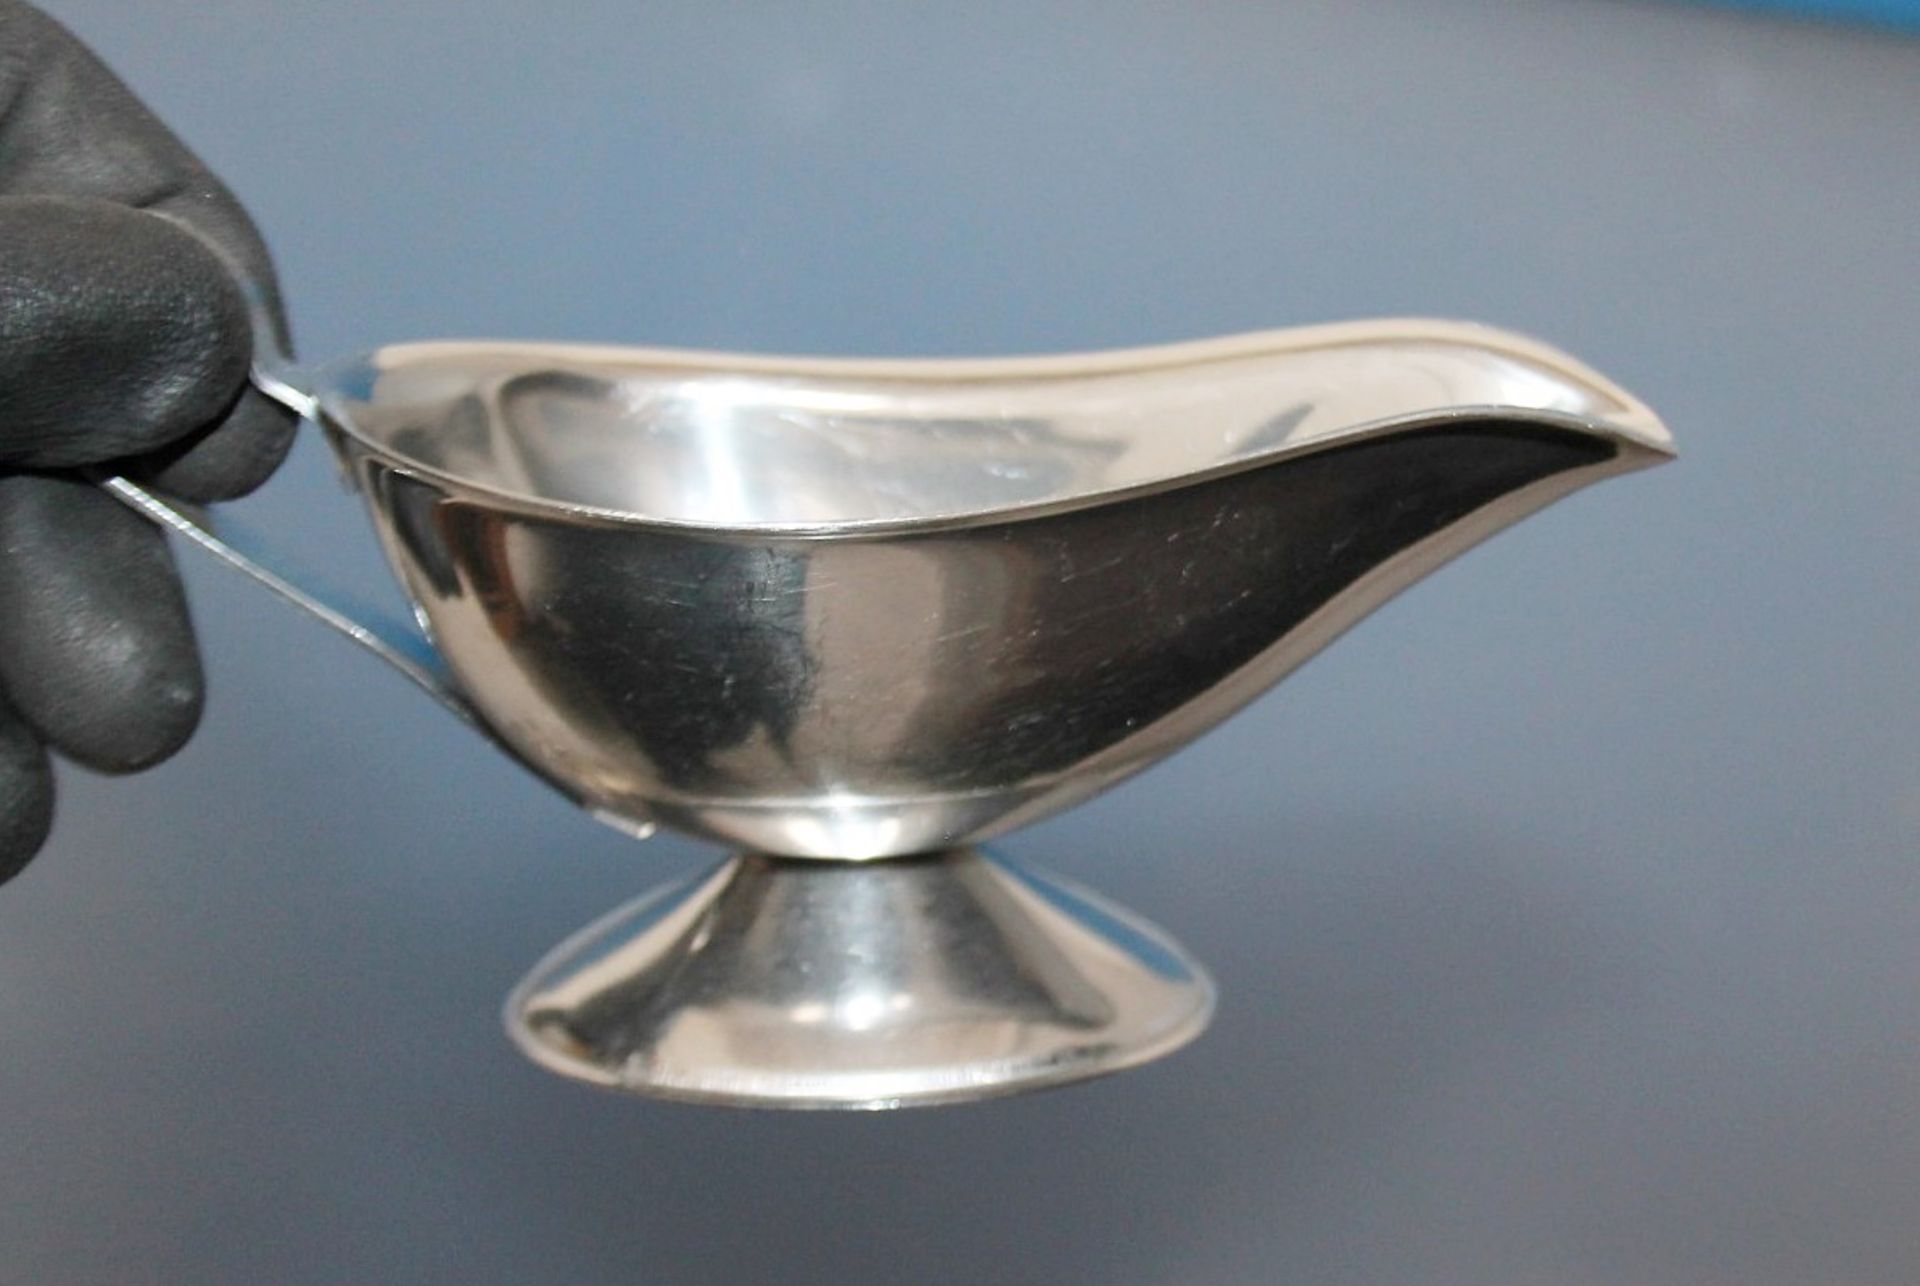 30 x Assorted Silver-Plated Sauce Boats - The Majority Strong and Woodhatch Branded - Recently - Image 5 of 8